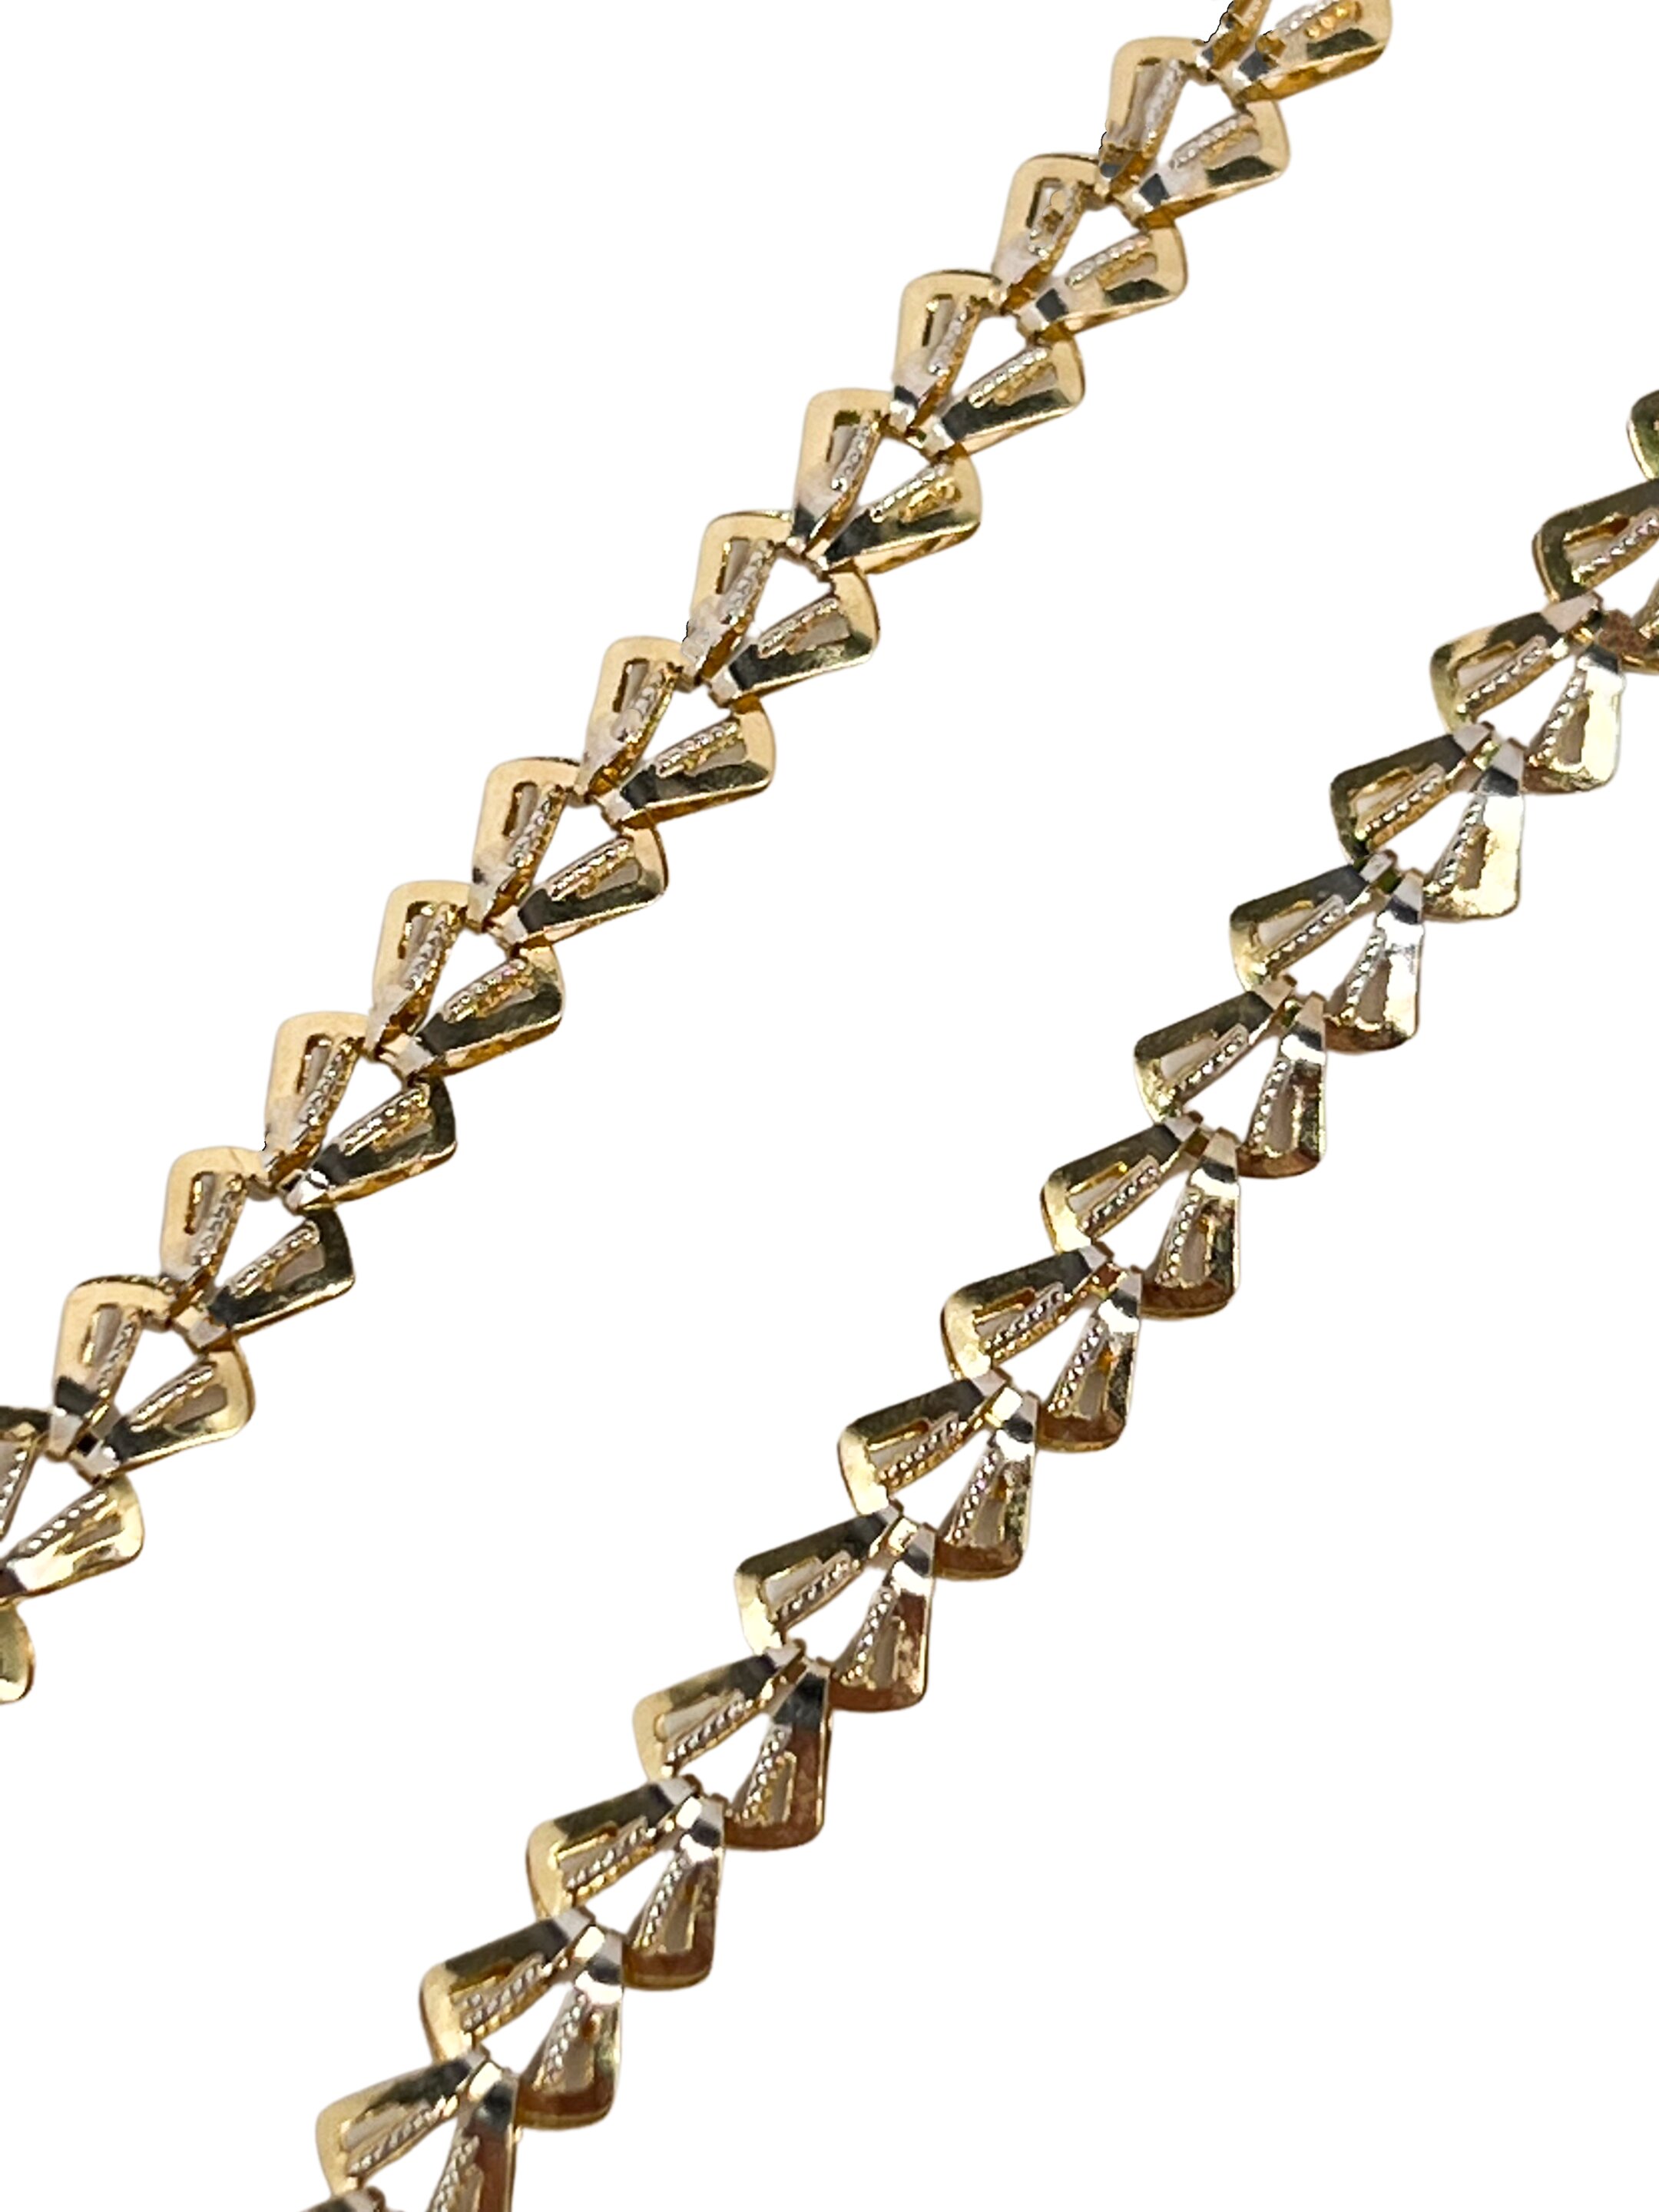 Modern two-tone gold necklace